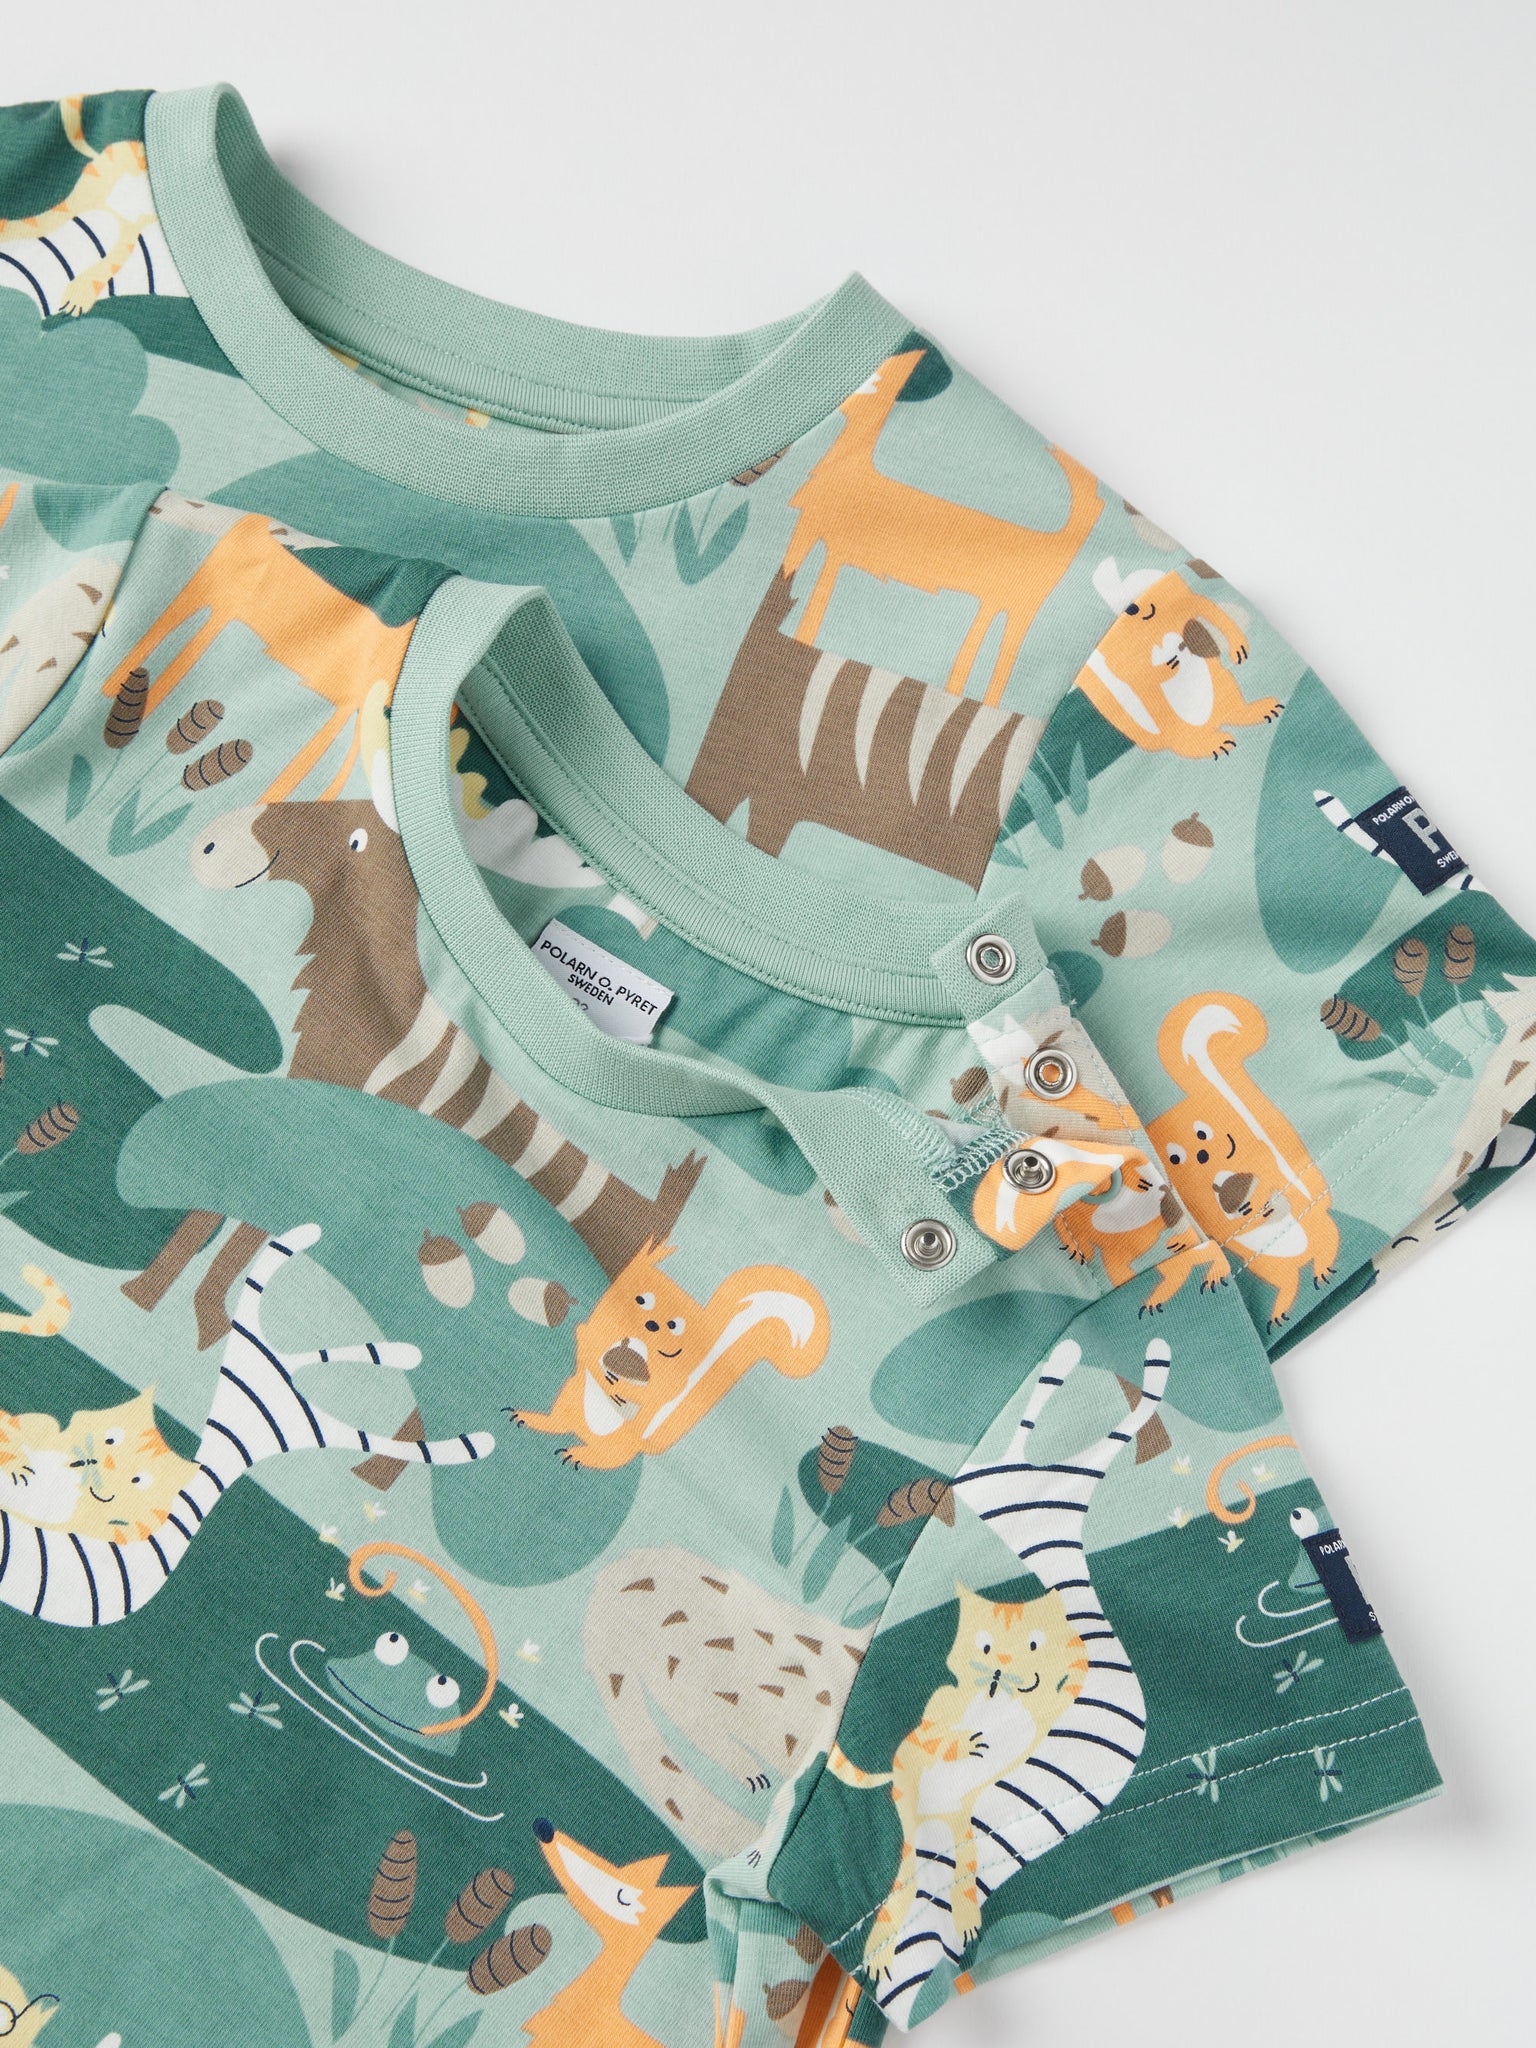 Forest Animal Print Kids T-Shirt from the Polarn O. Pyret kidswear collection. Nordic kids clothes made from sustainable sources.